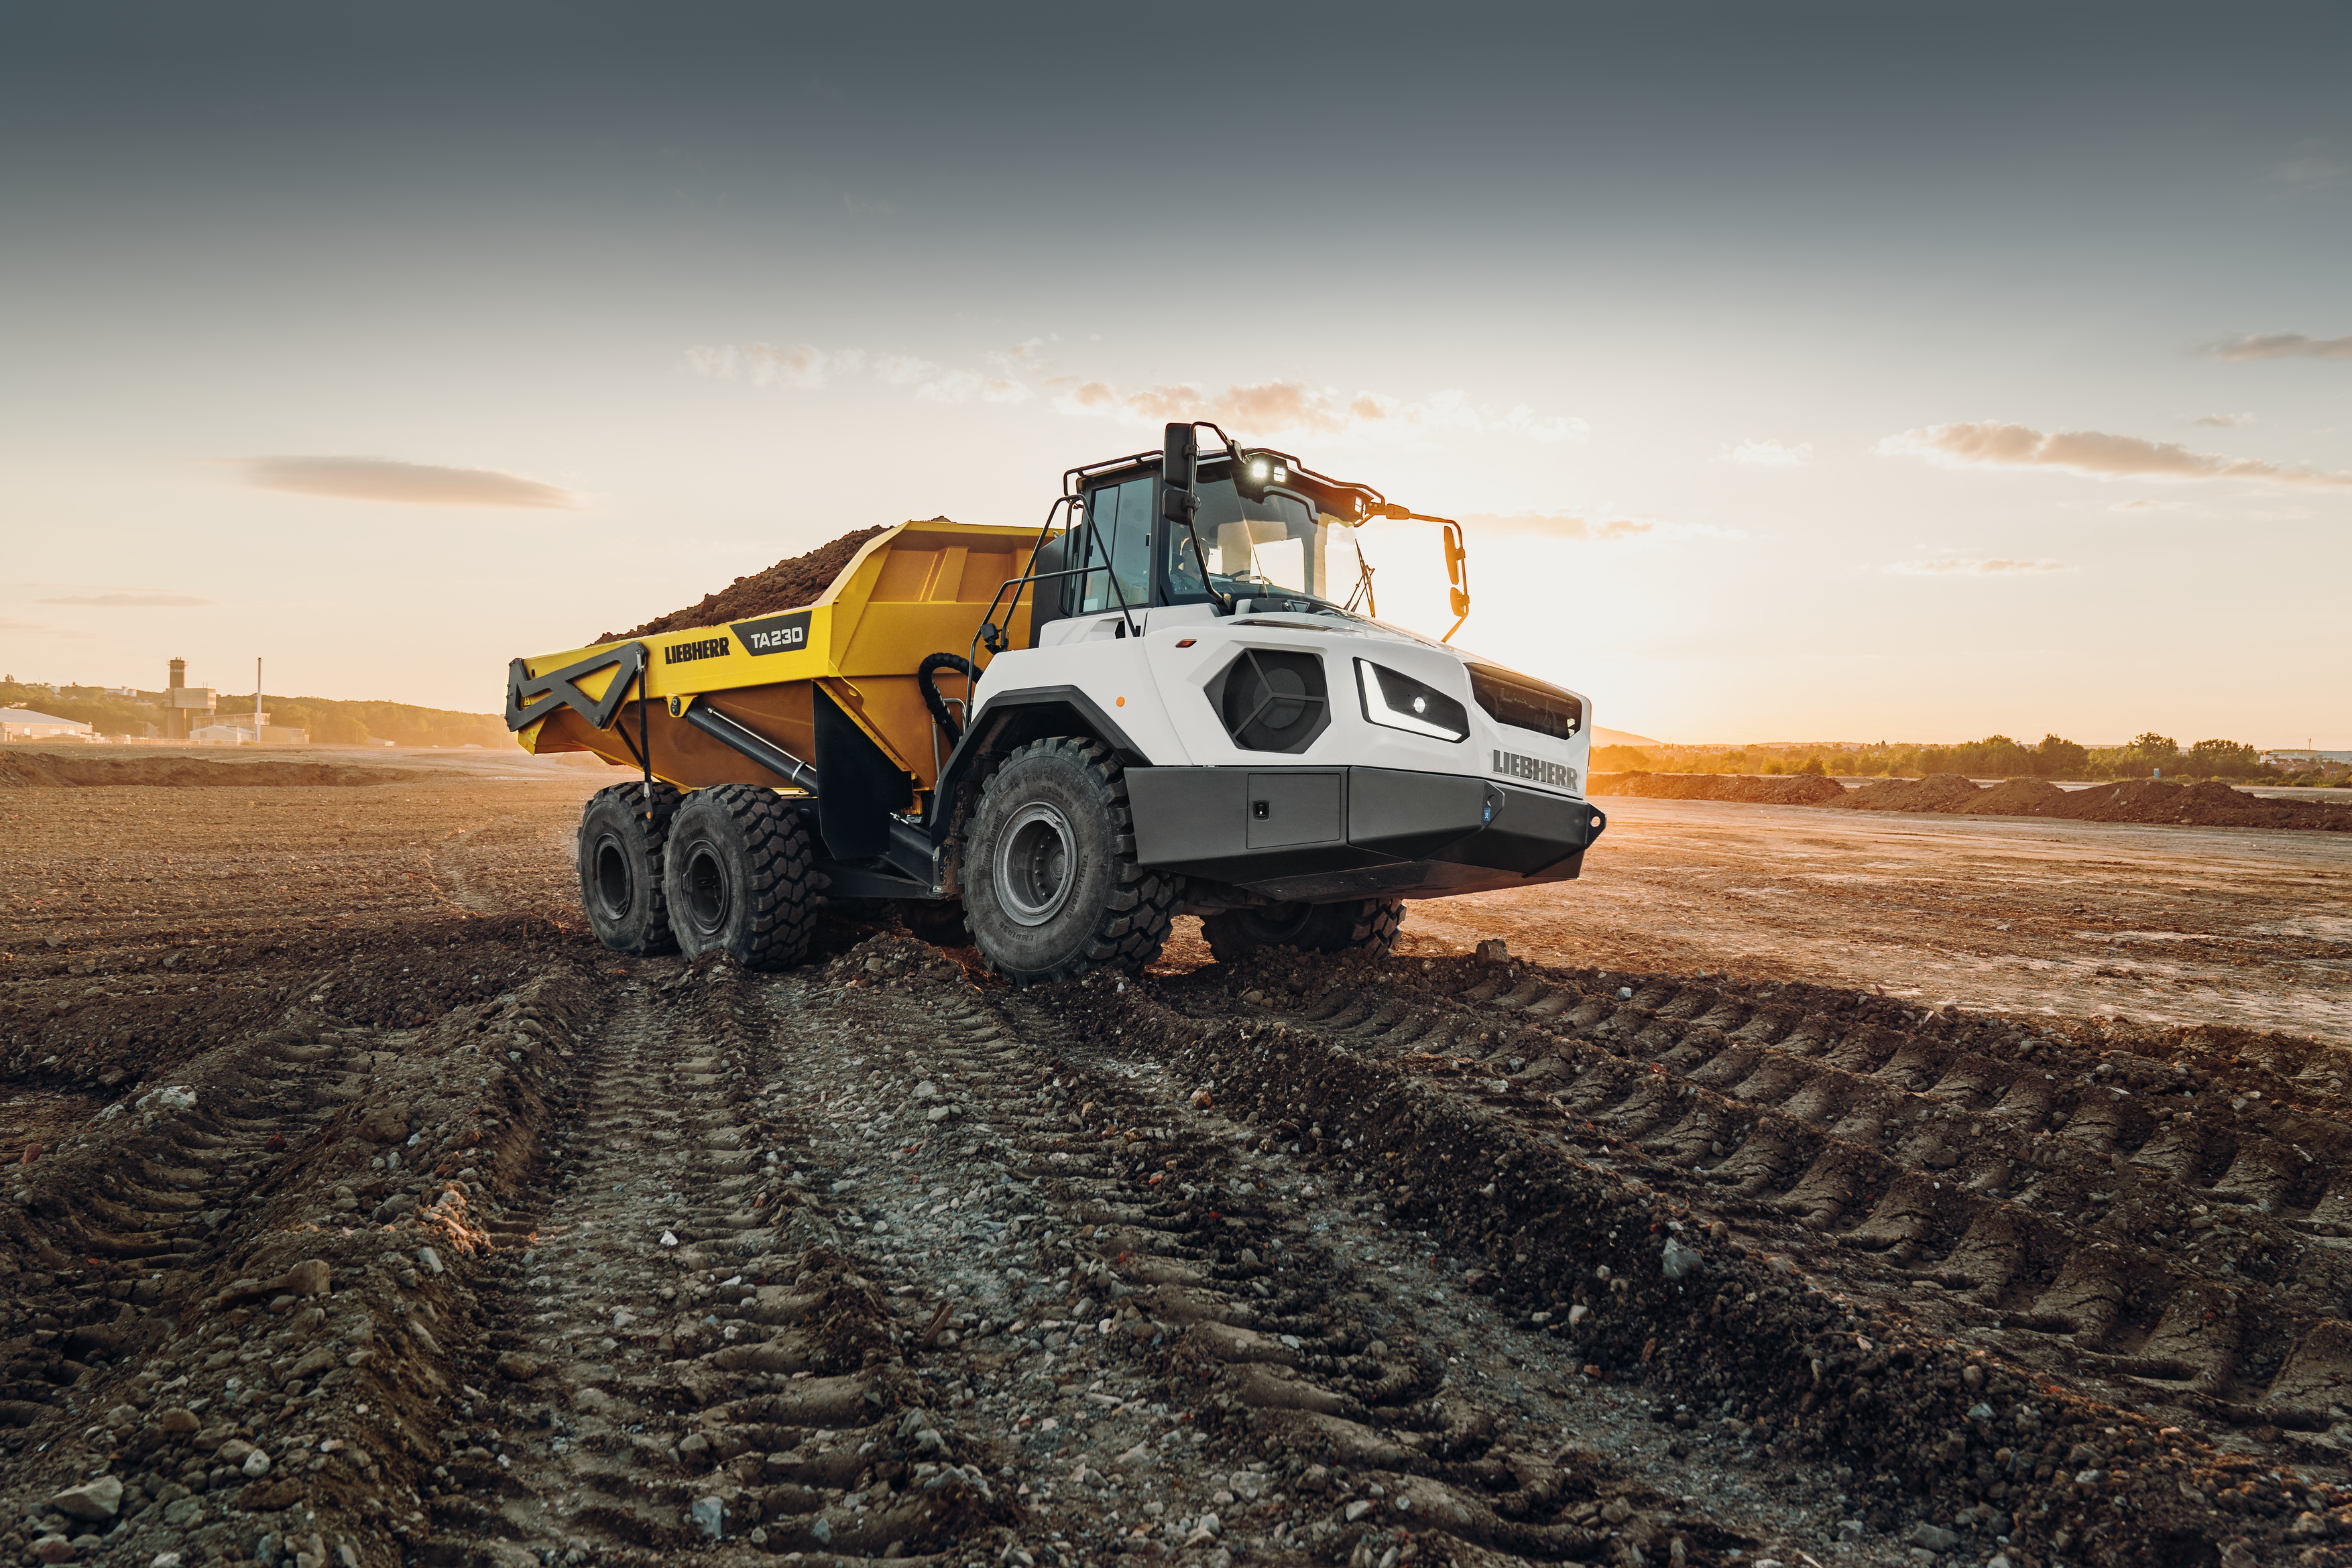 The articulated dump truck TA 230 Litronic from Liebherr celebrates its début at Bauma 2022: This is the first international trade fair appearance of the machine.